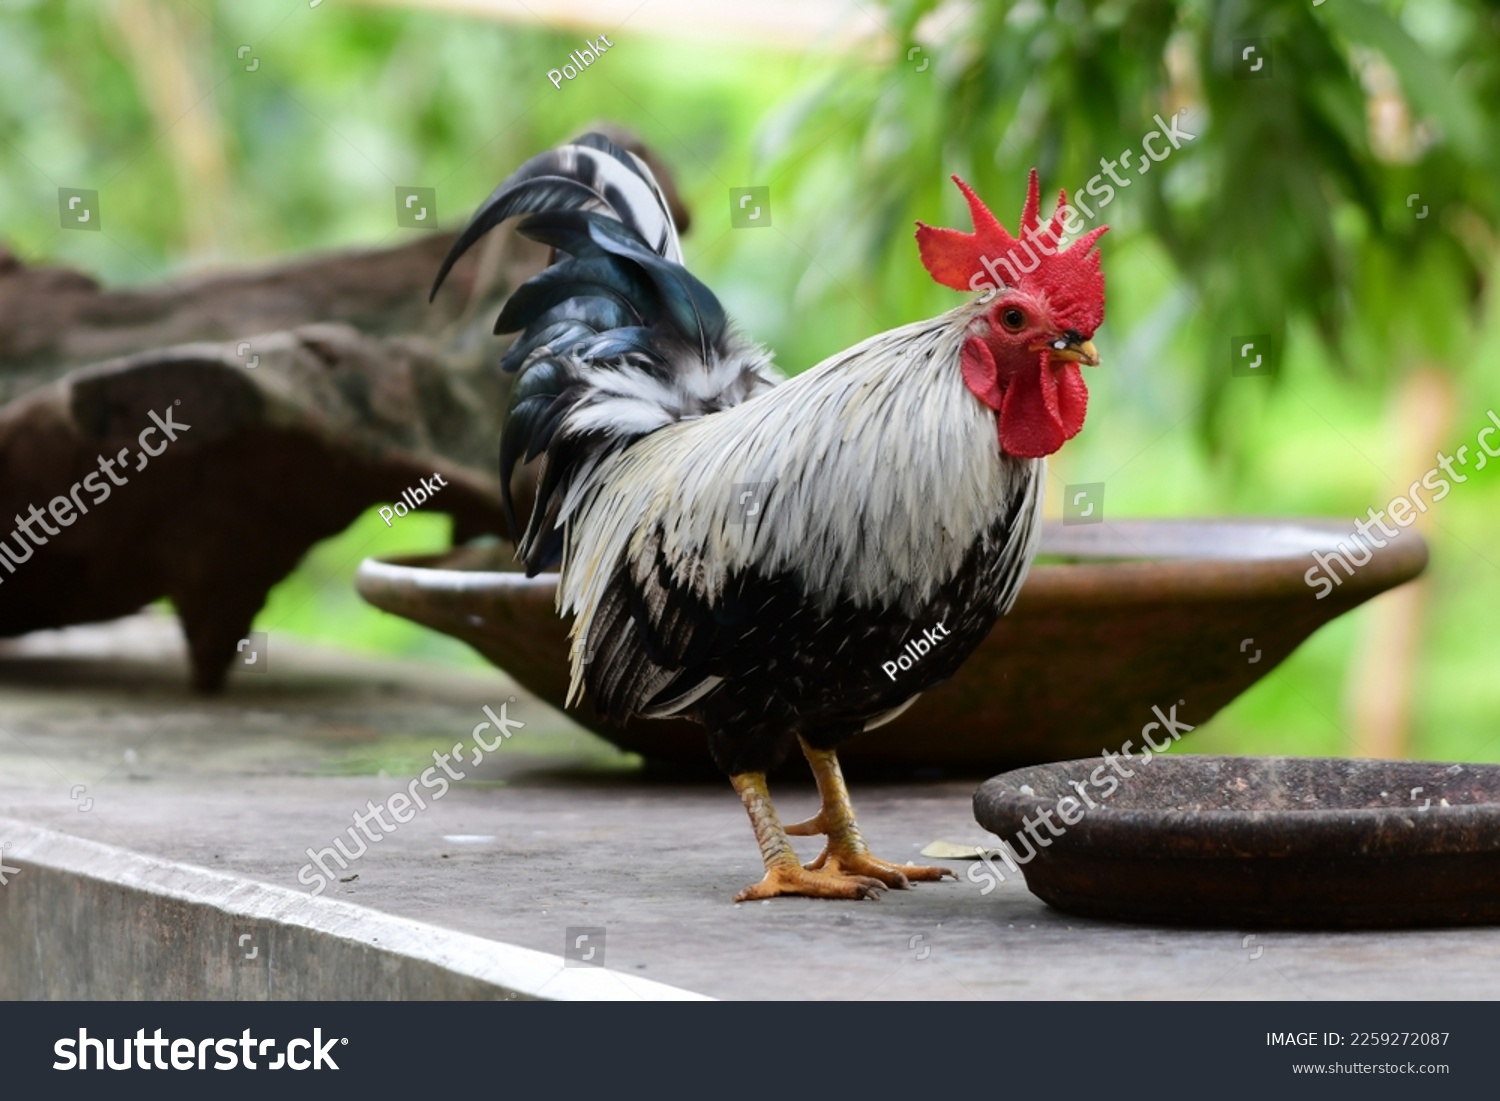 Beautiful bantam with colorful feathers. Focus on bantam and blur the background. #2259272087